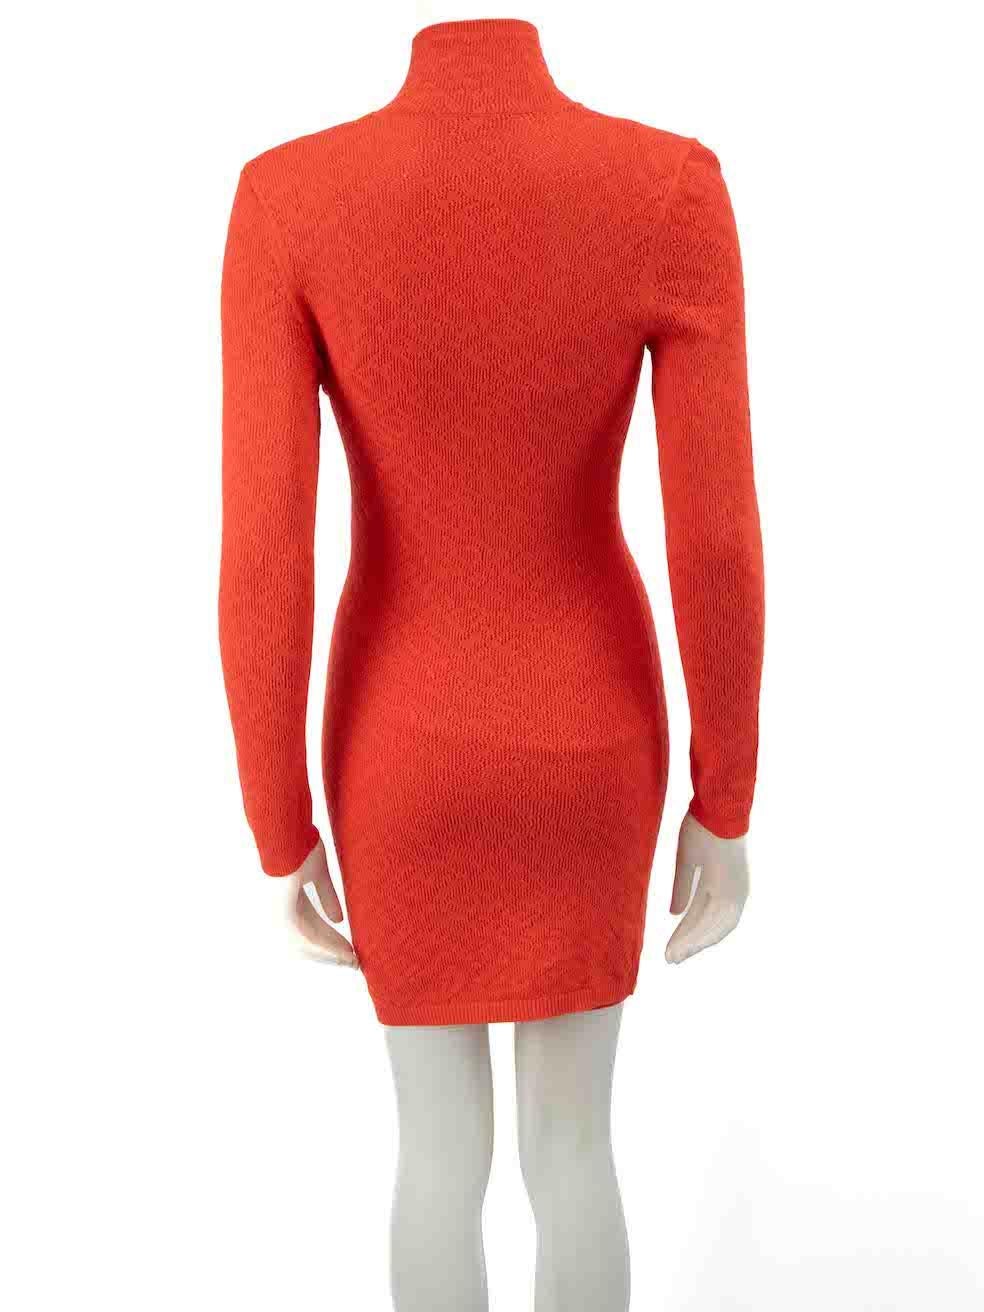 Fendi Fendi x Skims Red Mesh Logo Knit Dress Size M In Excellent Condition For Sale In London, GB